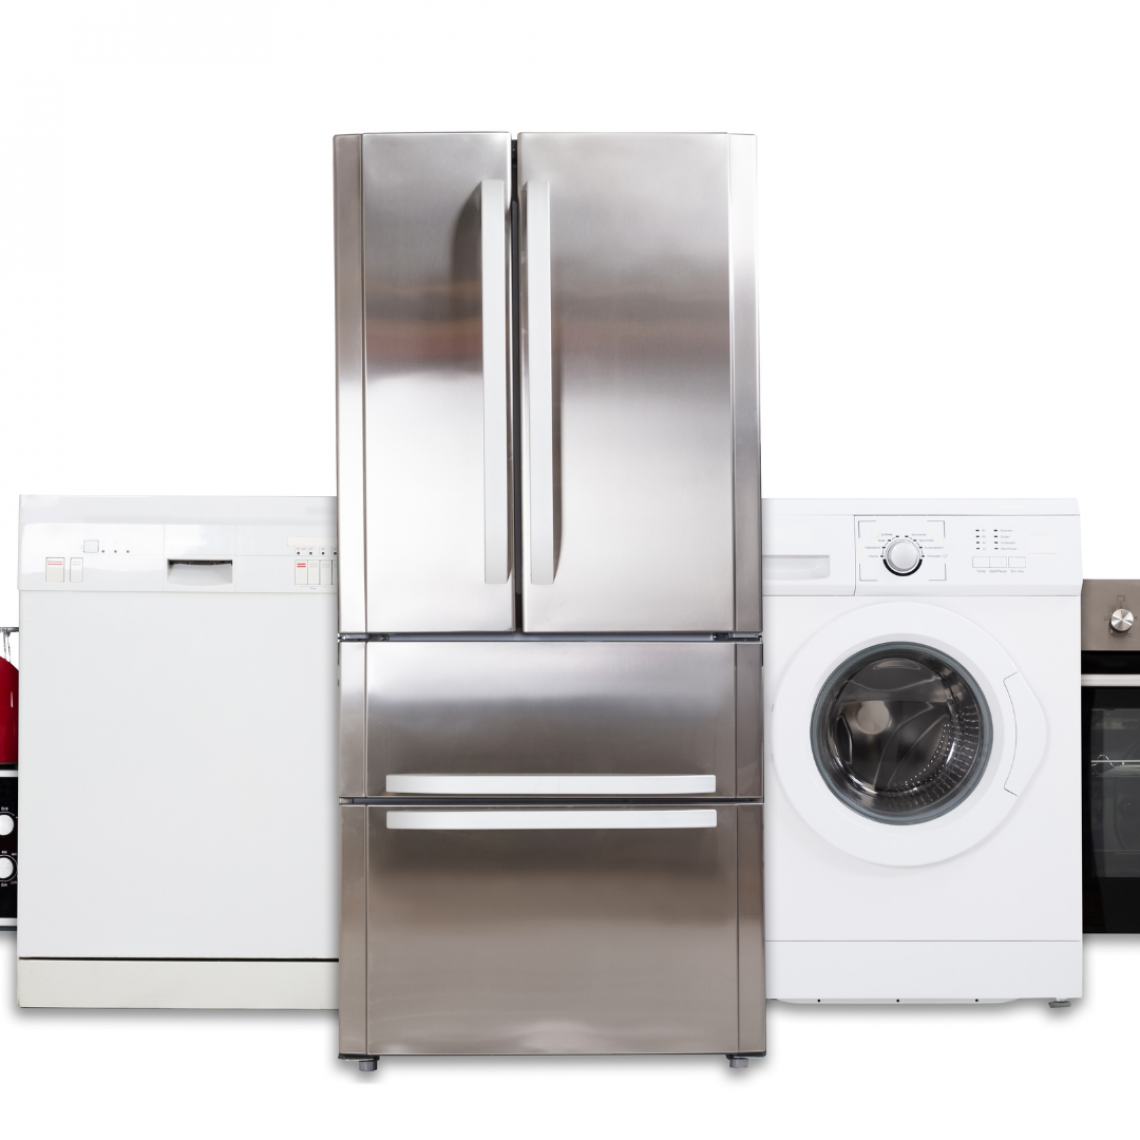 Appliance Maintenance for your Florida Home